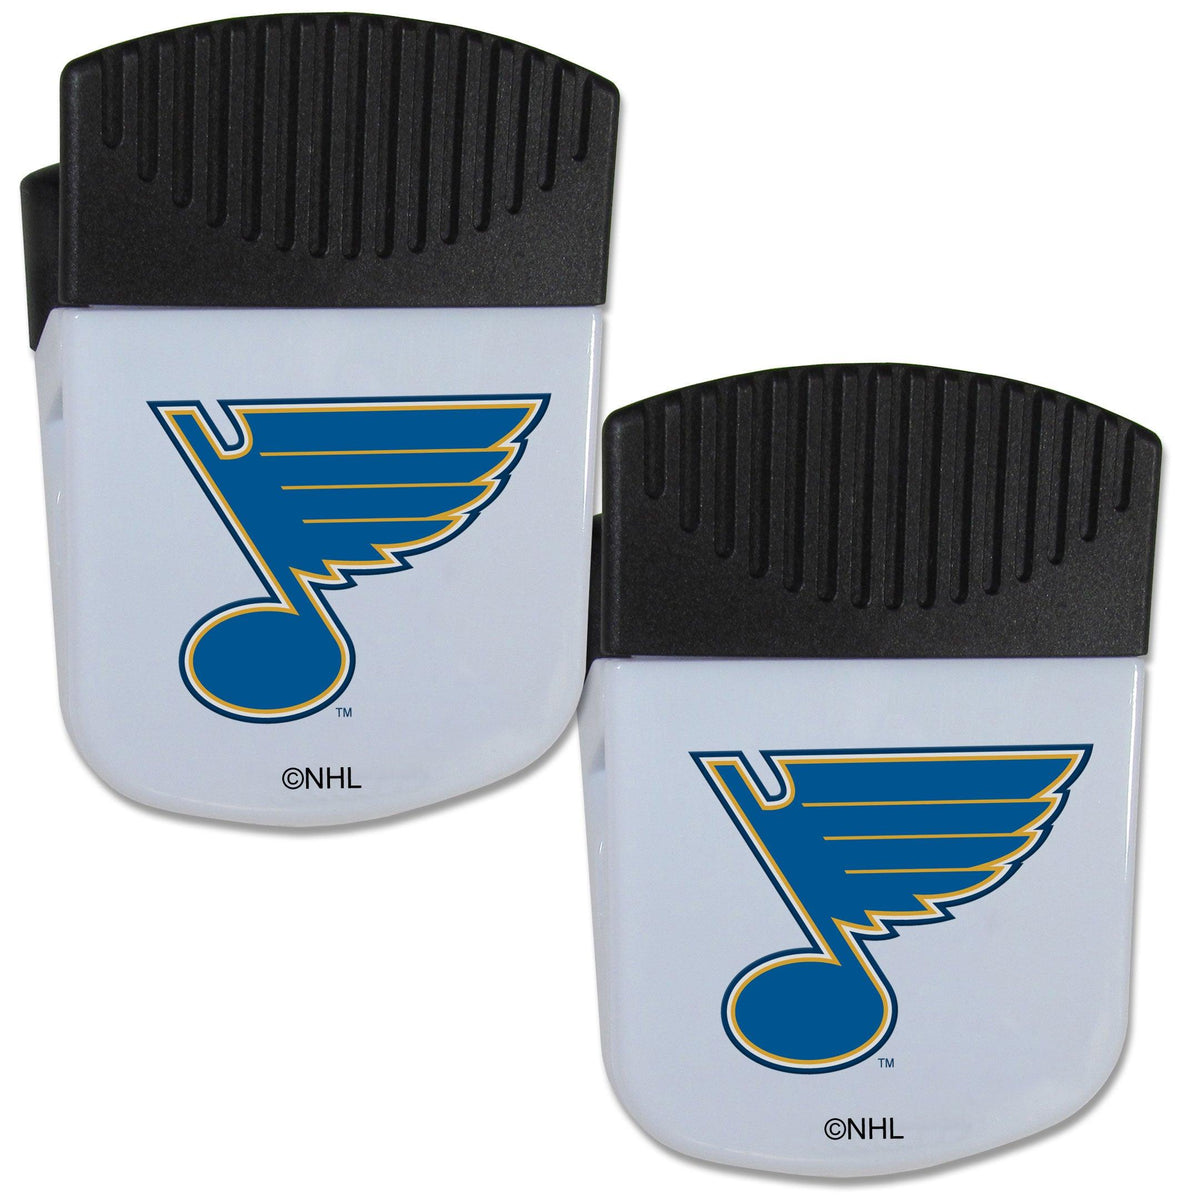 St. Louis Blues® Chip Clip Magnet with Bottle Opener, 2 pack - Flyclothing LLC